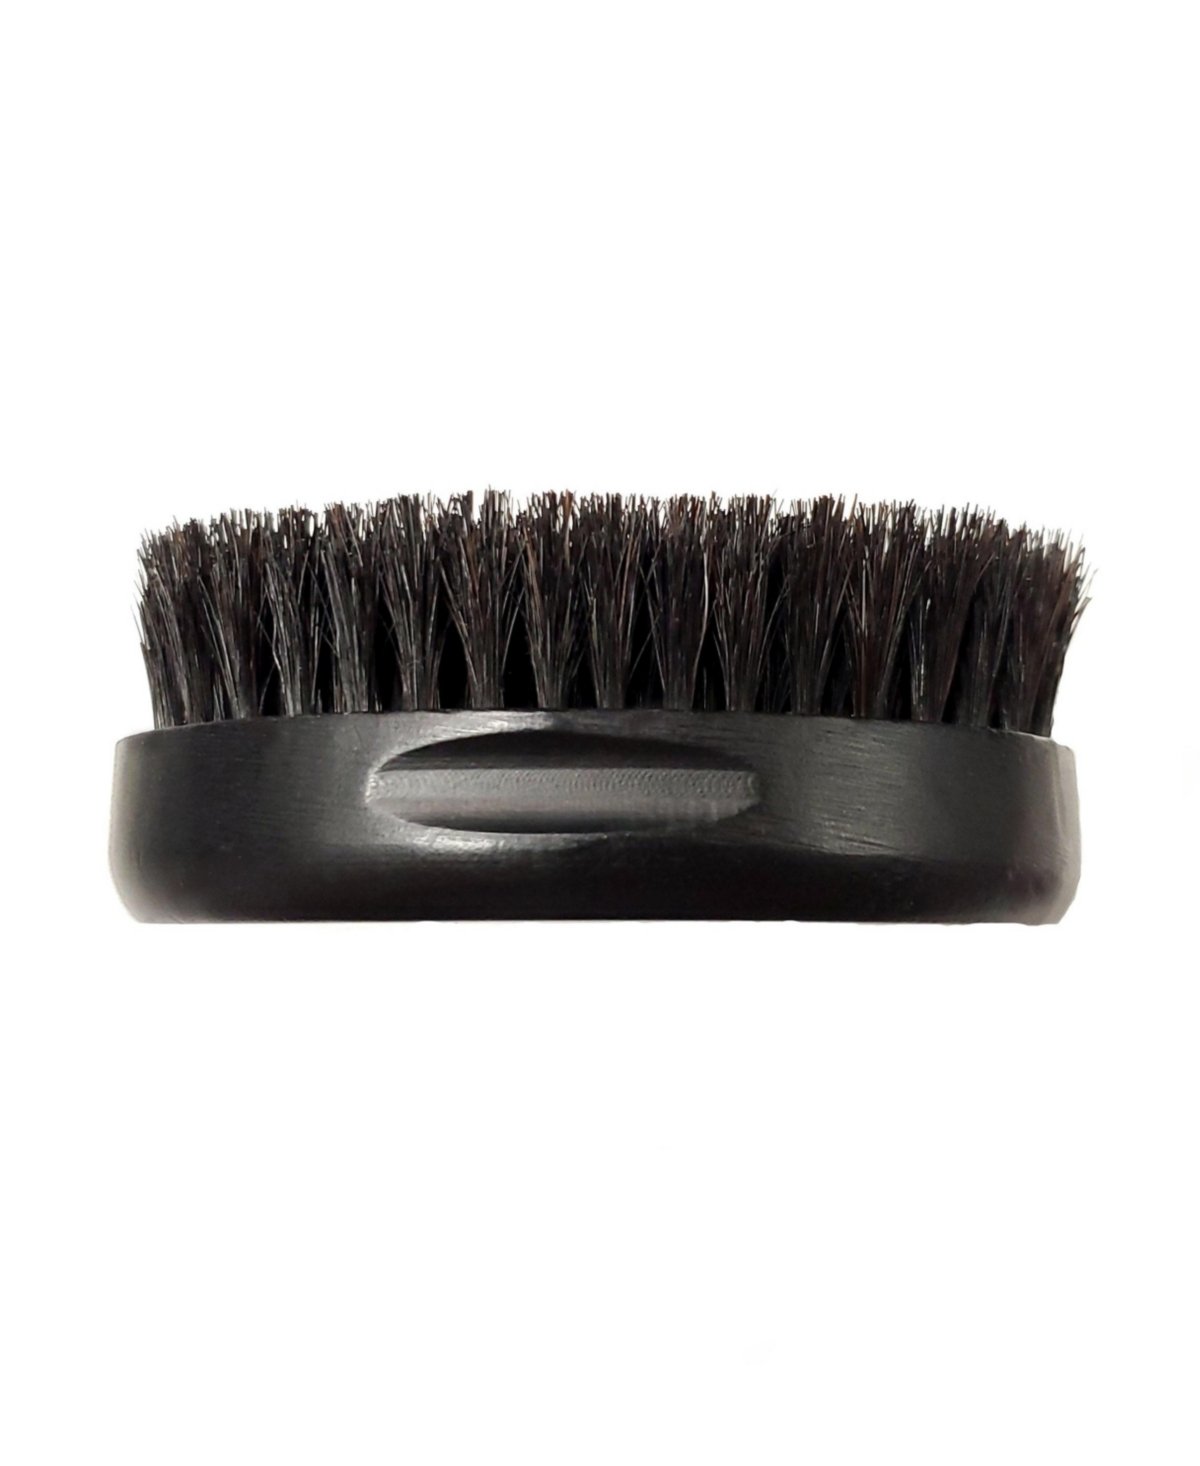 Barber Oval Military-Inspired Hair Brush 100% Natural Boar Bristles with Wood Palm Handle - Black